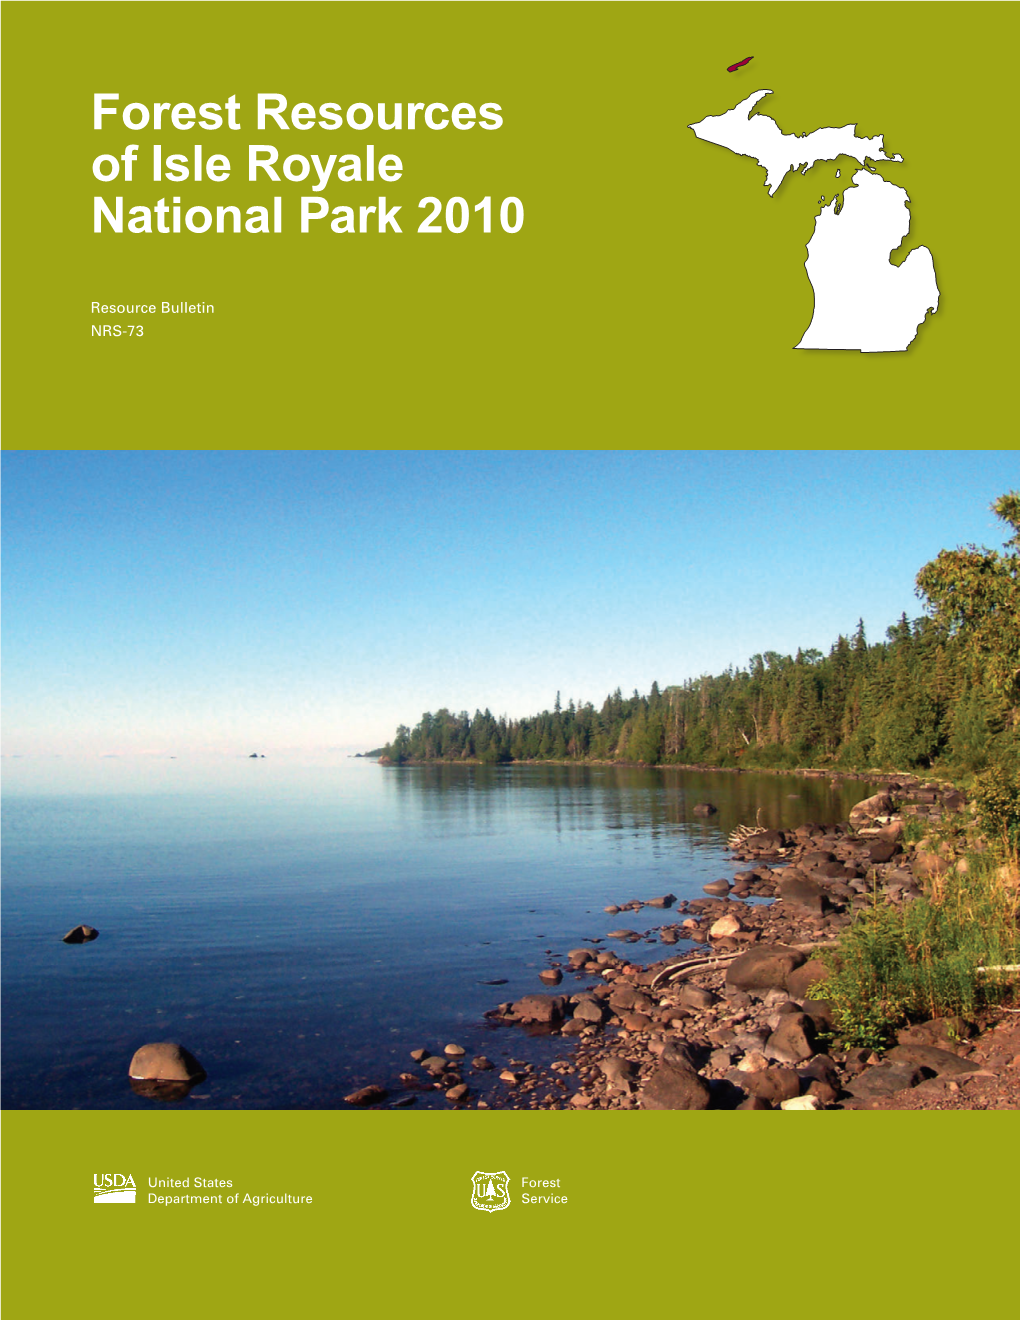 Forest Resources of Isle Royale National Park 2010